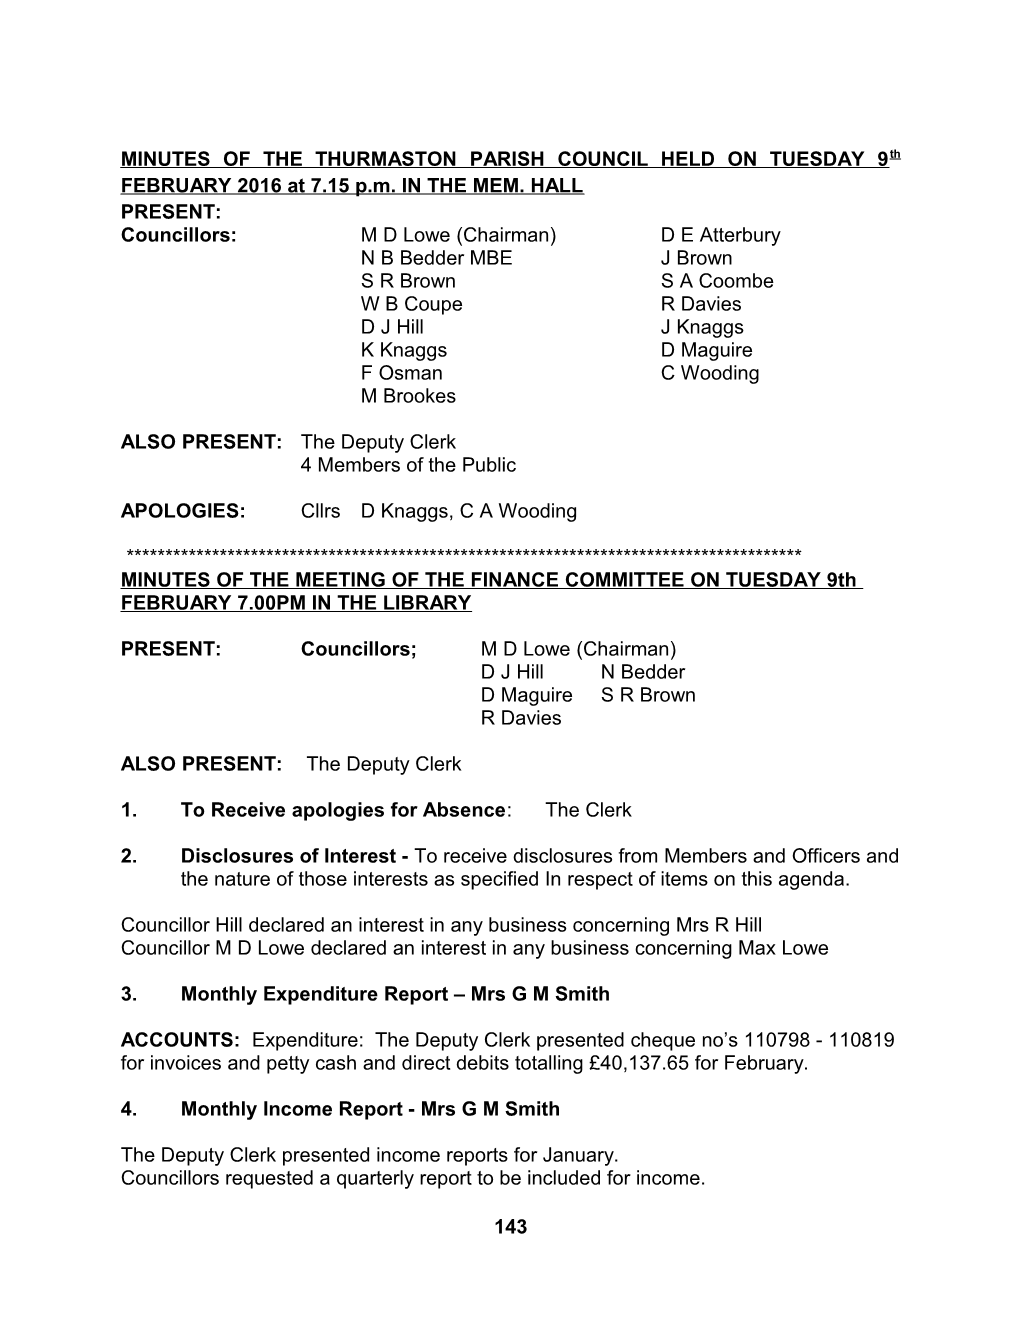 MINUTES of the MEETING of the THURMASTON PARISH COUNCIL HELD on TUESDAY 10Th APRIL at 7